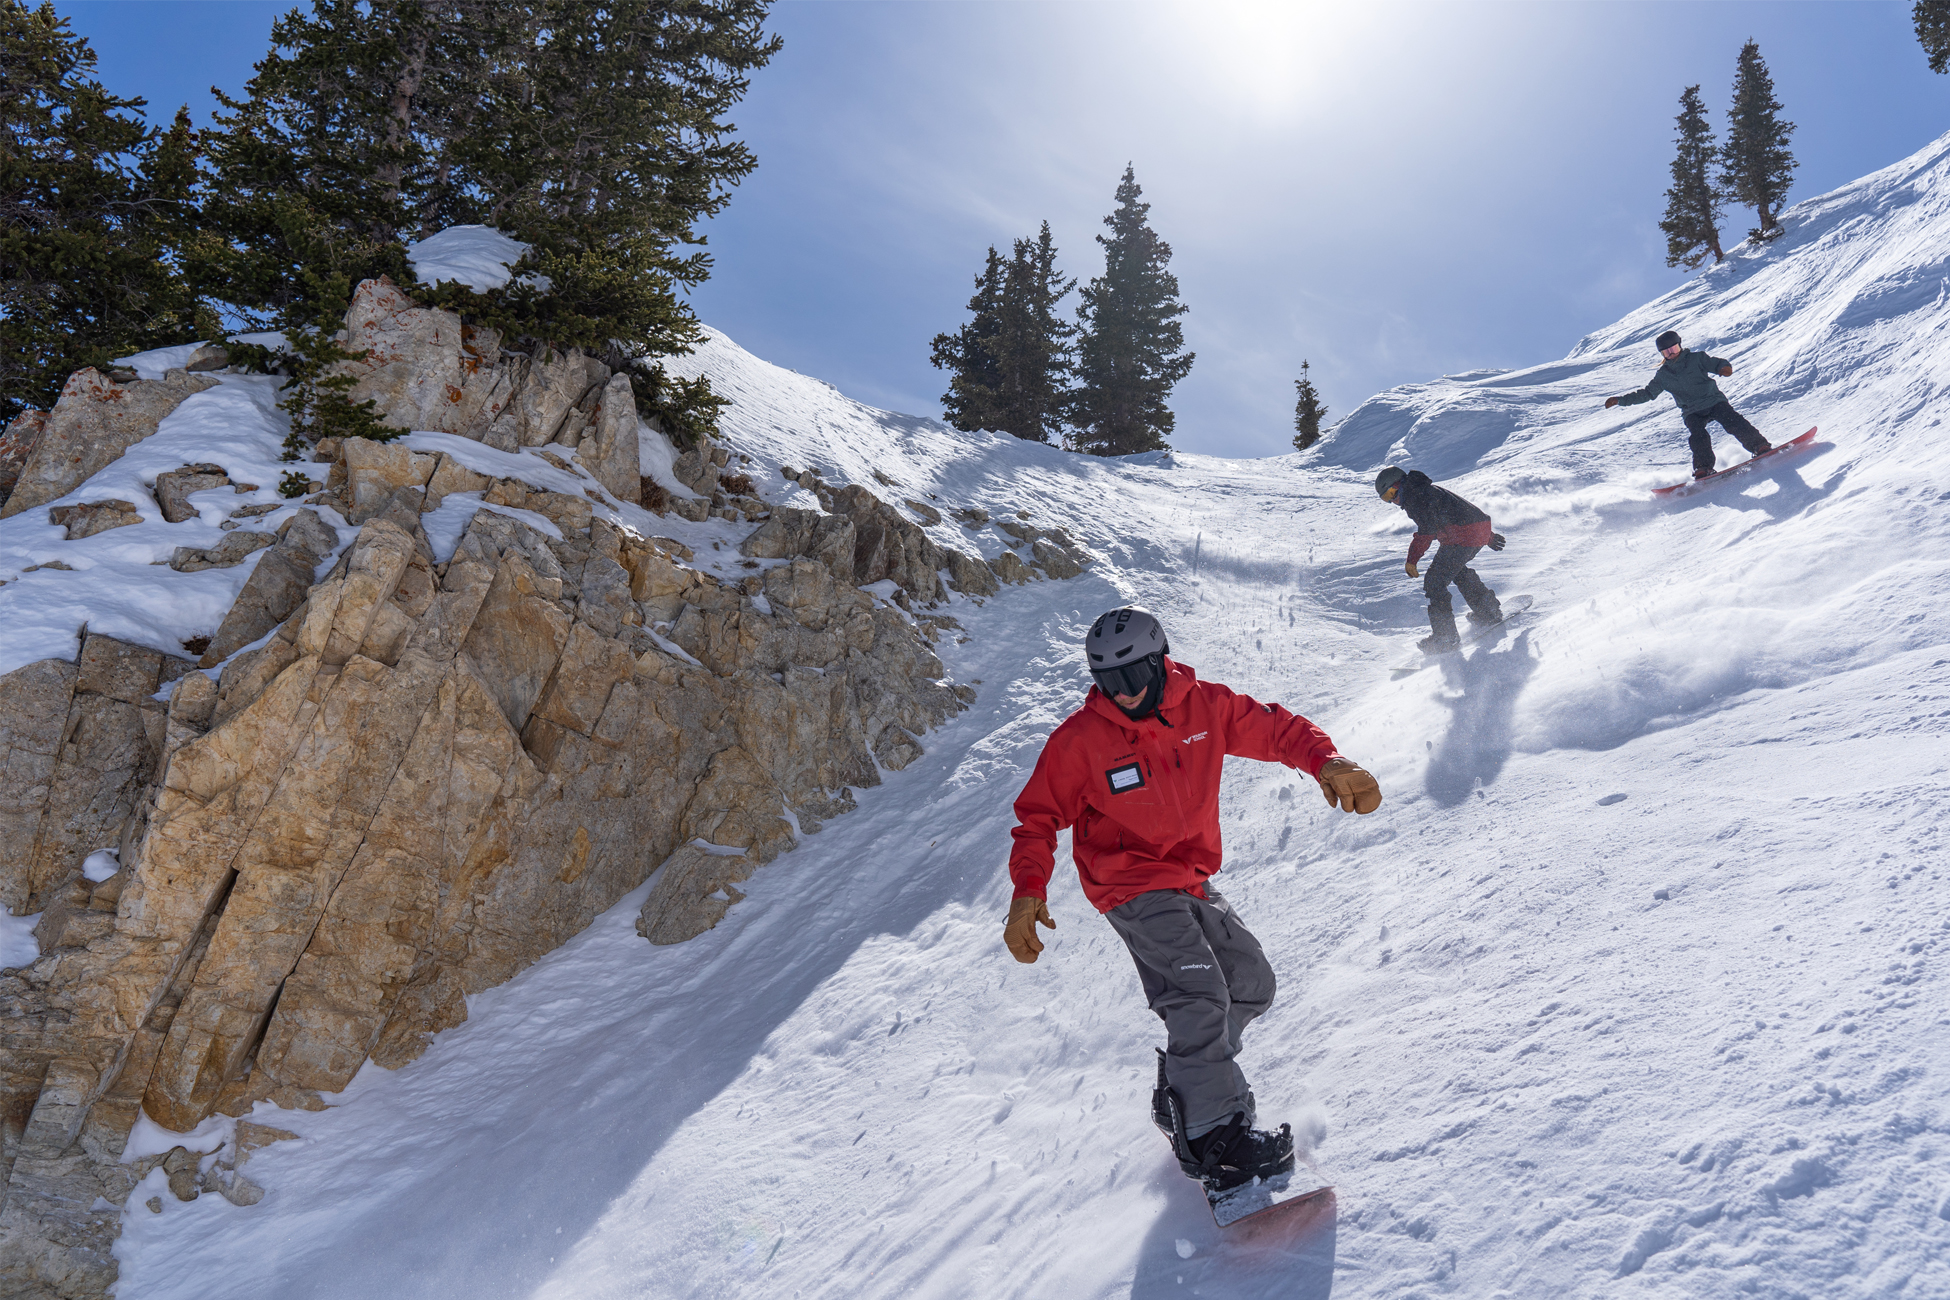 Join a lesson or have a private guide around Snowbird.